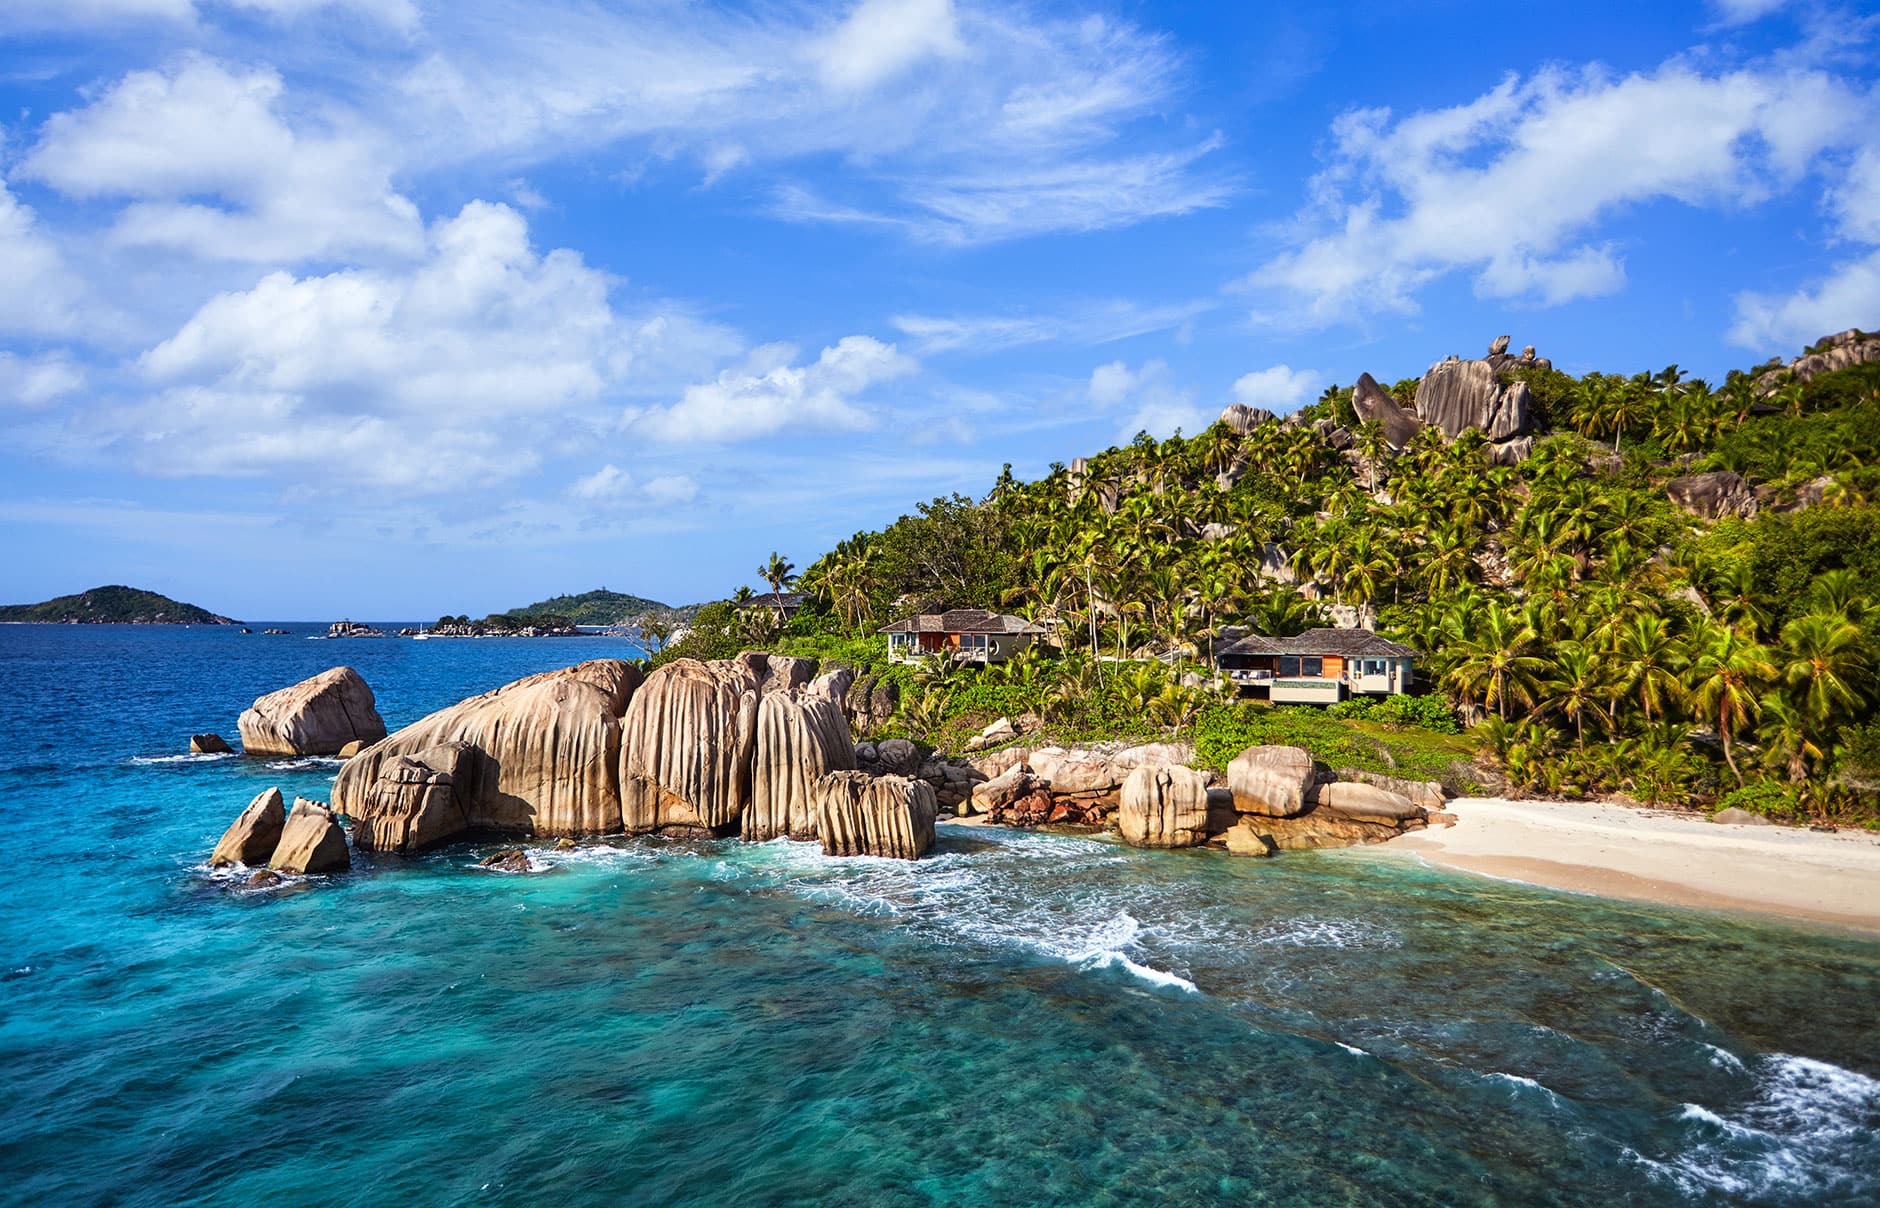 The 9 Best Luxury Resorts in the Seychelles 9, by TravelPlusStyle